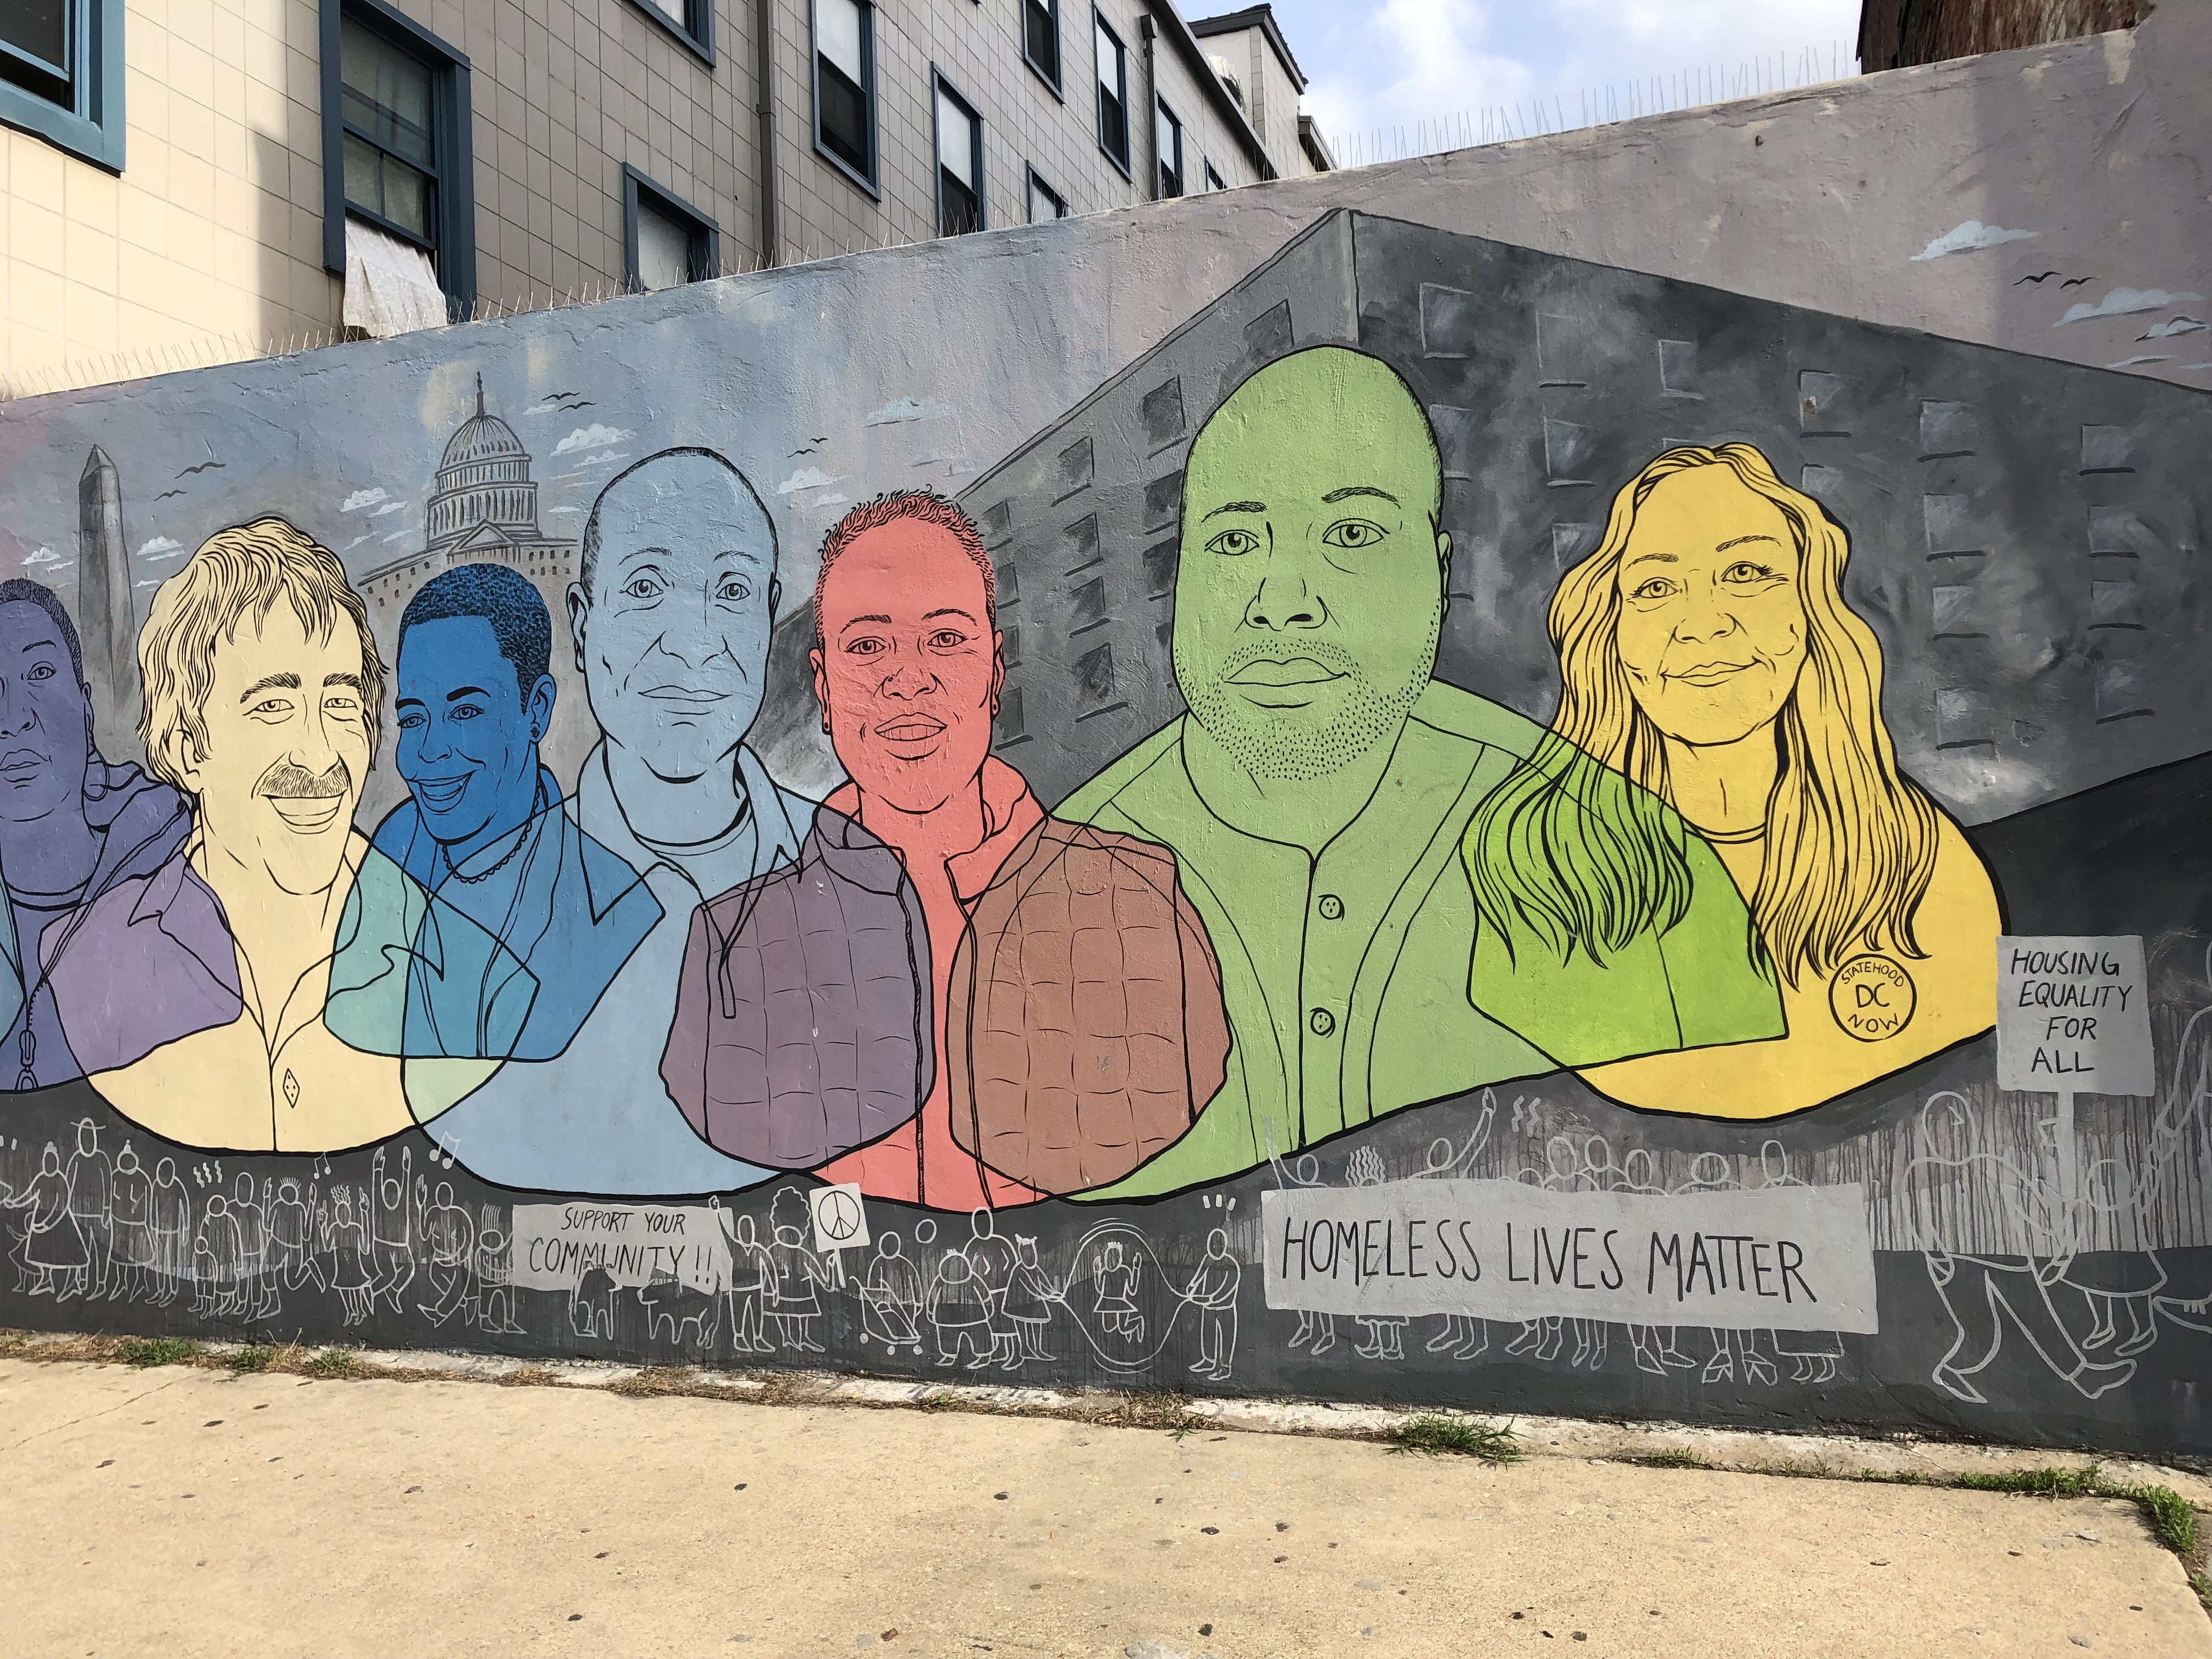 The Community for Creative Non-Violence mural